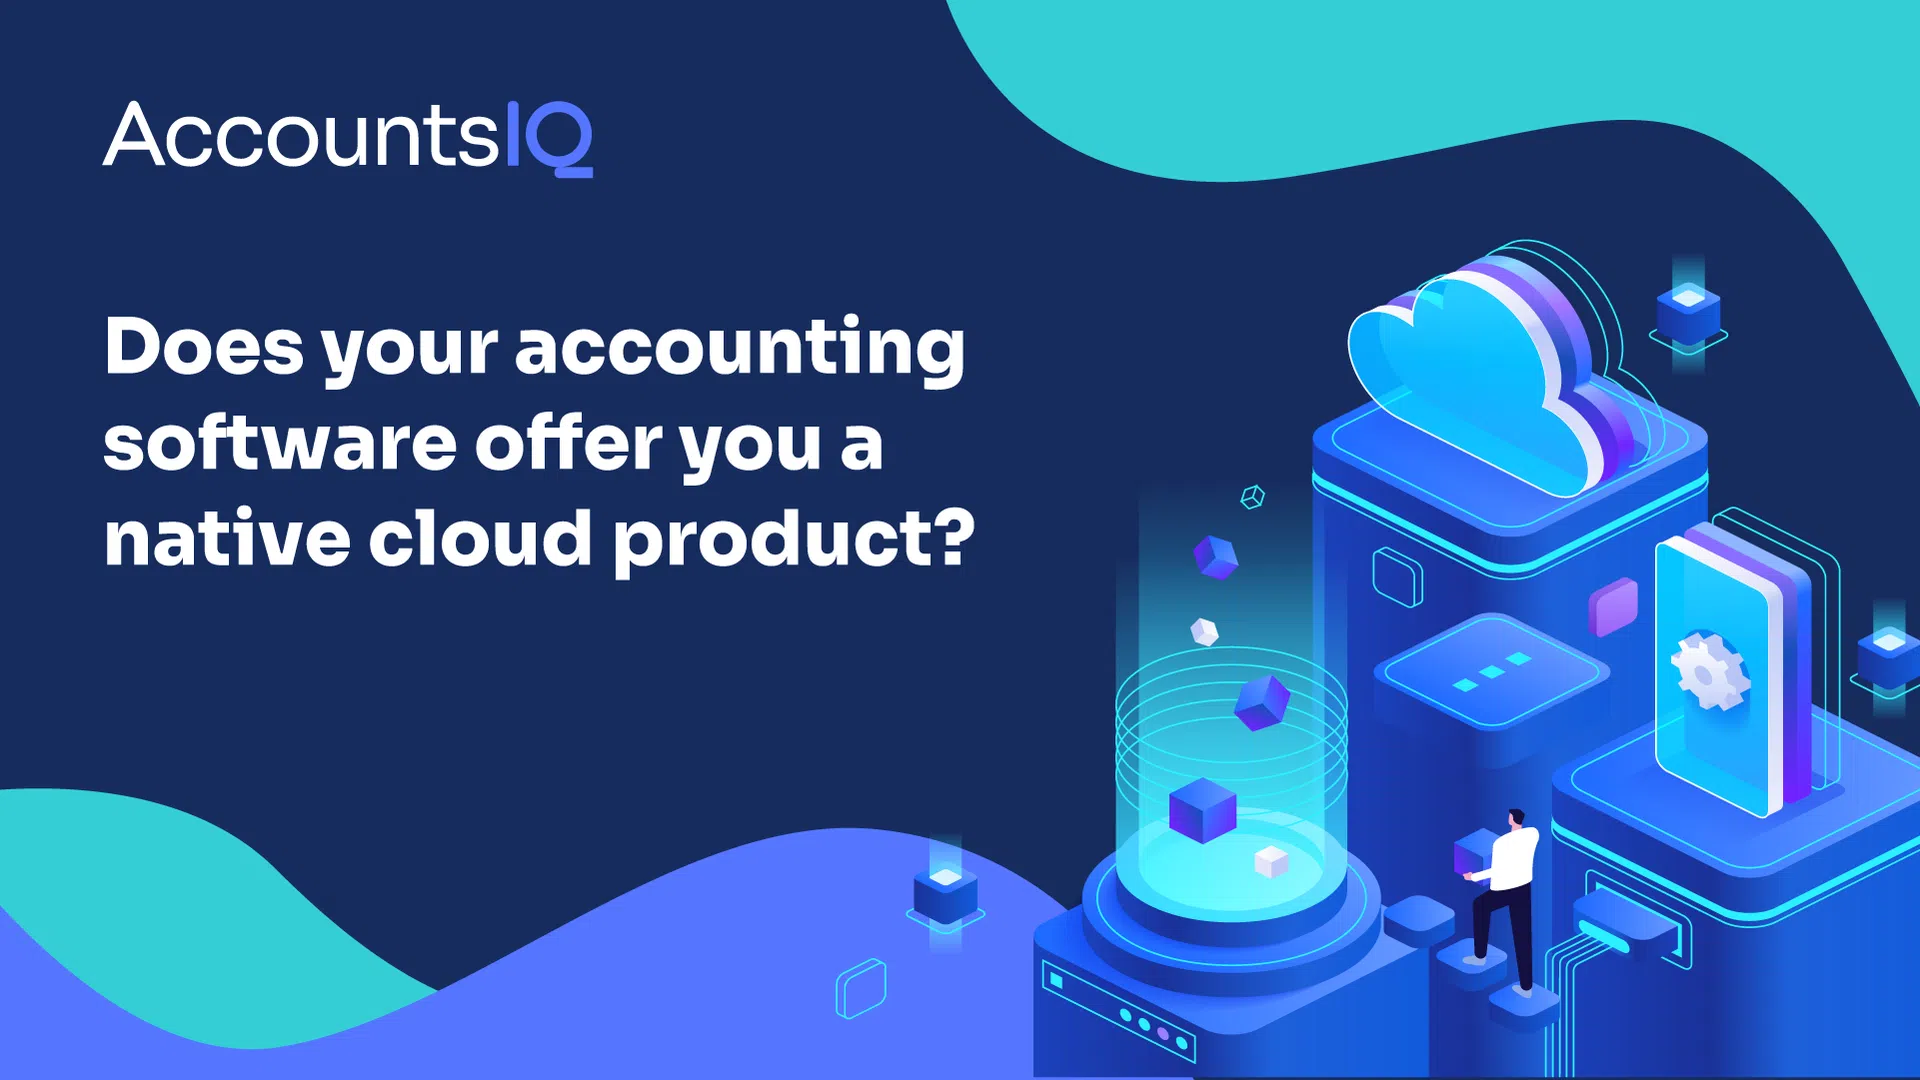 AccountsIQ: Does your accounting software offer you a native cloud product? image